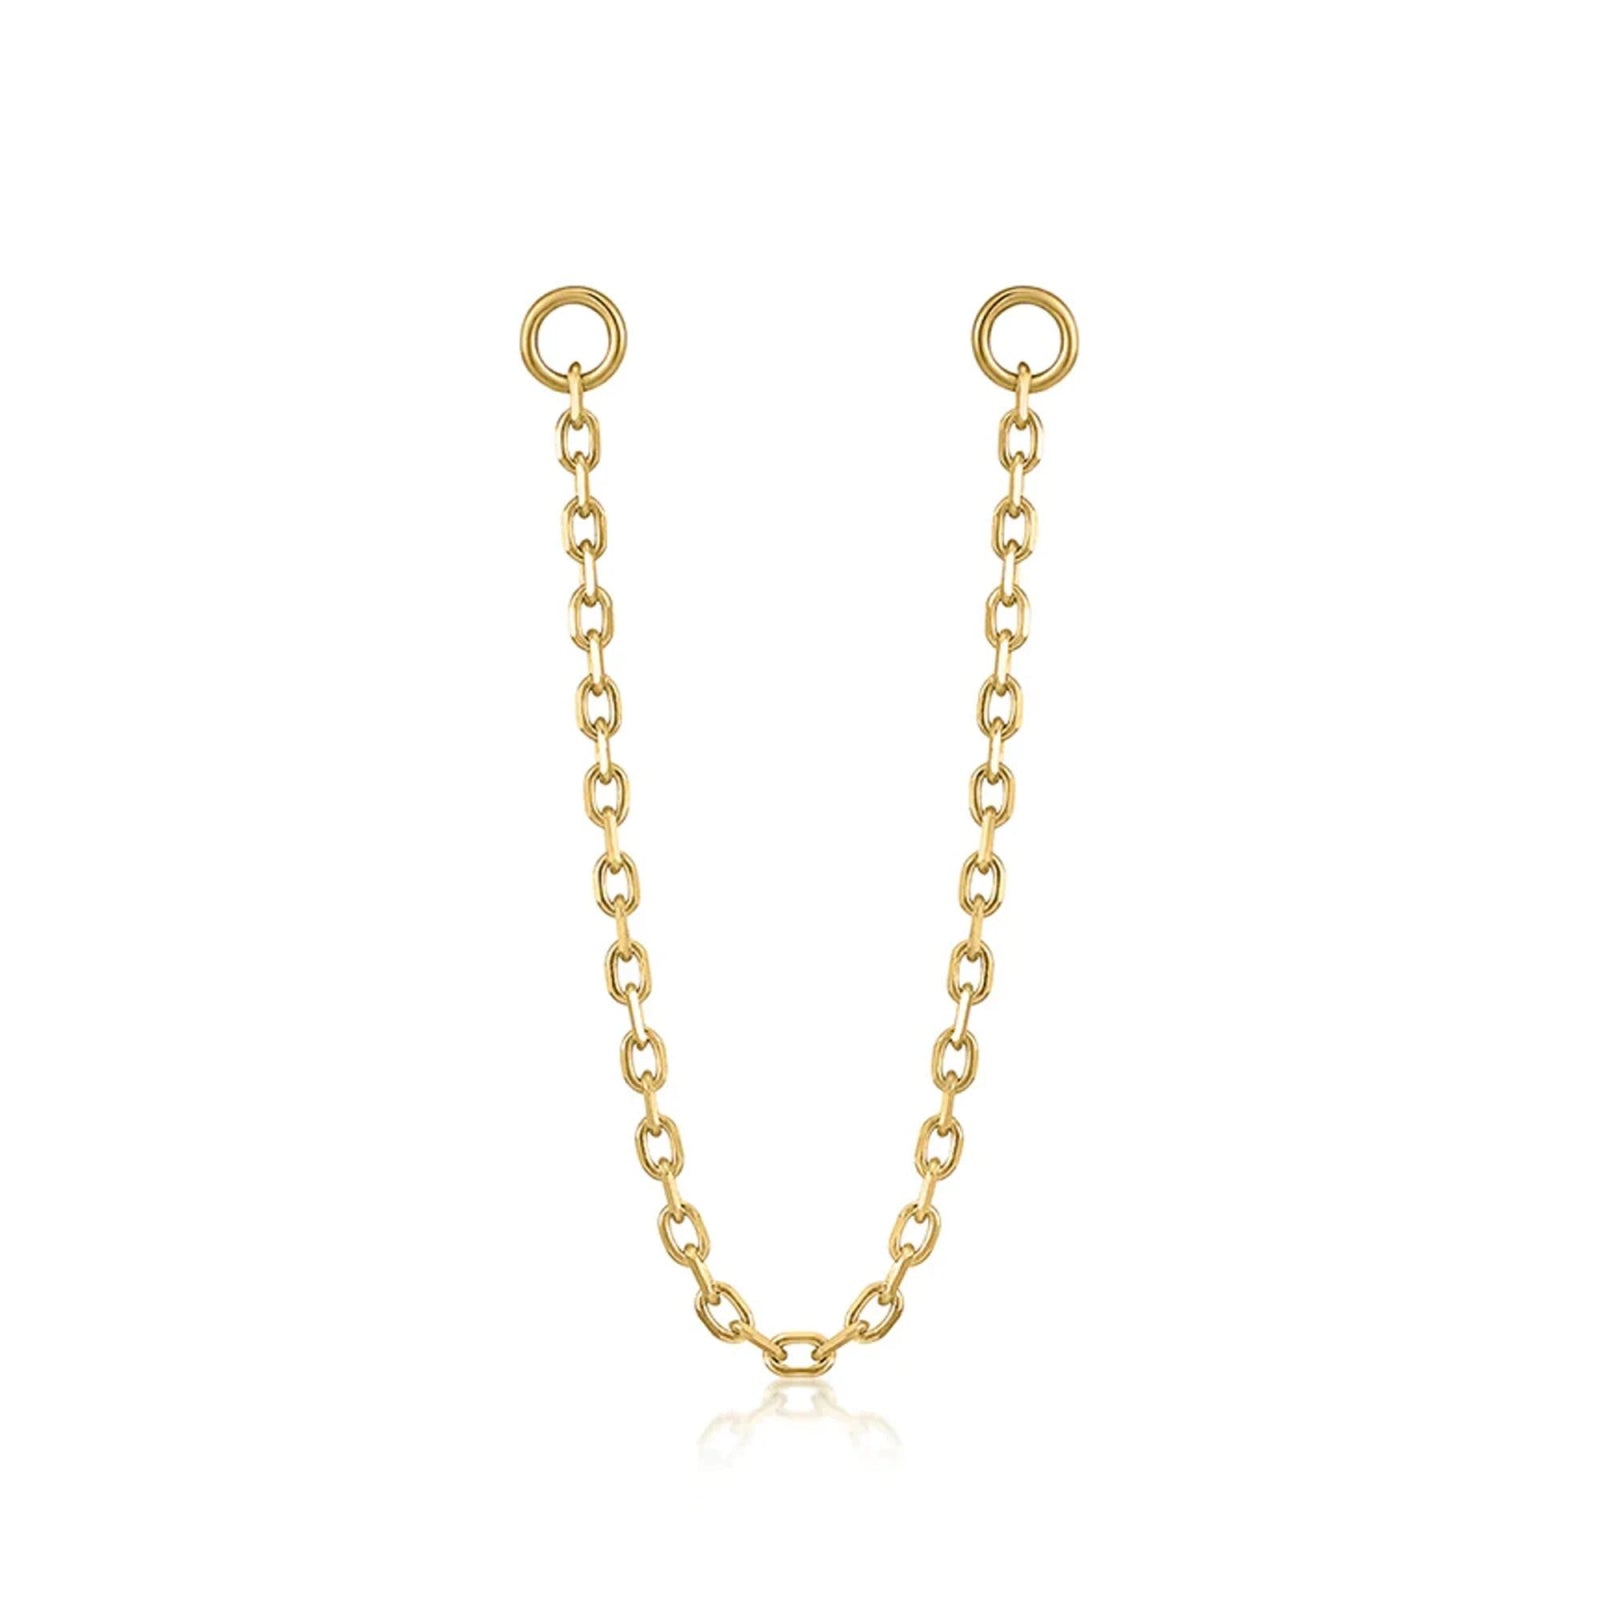 Earring Chain in 14k Solid Gold Earrings Estella Collection #product_description# 18386 14k New Arrivals Ready to Ship #tag4# #tag5# #tag6# #tag7# #tag8# #tag9# #tag10#